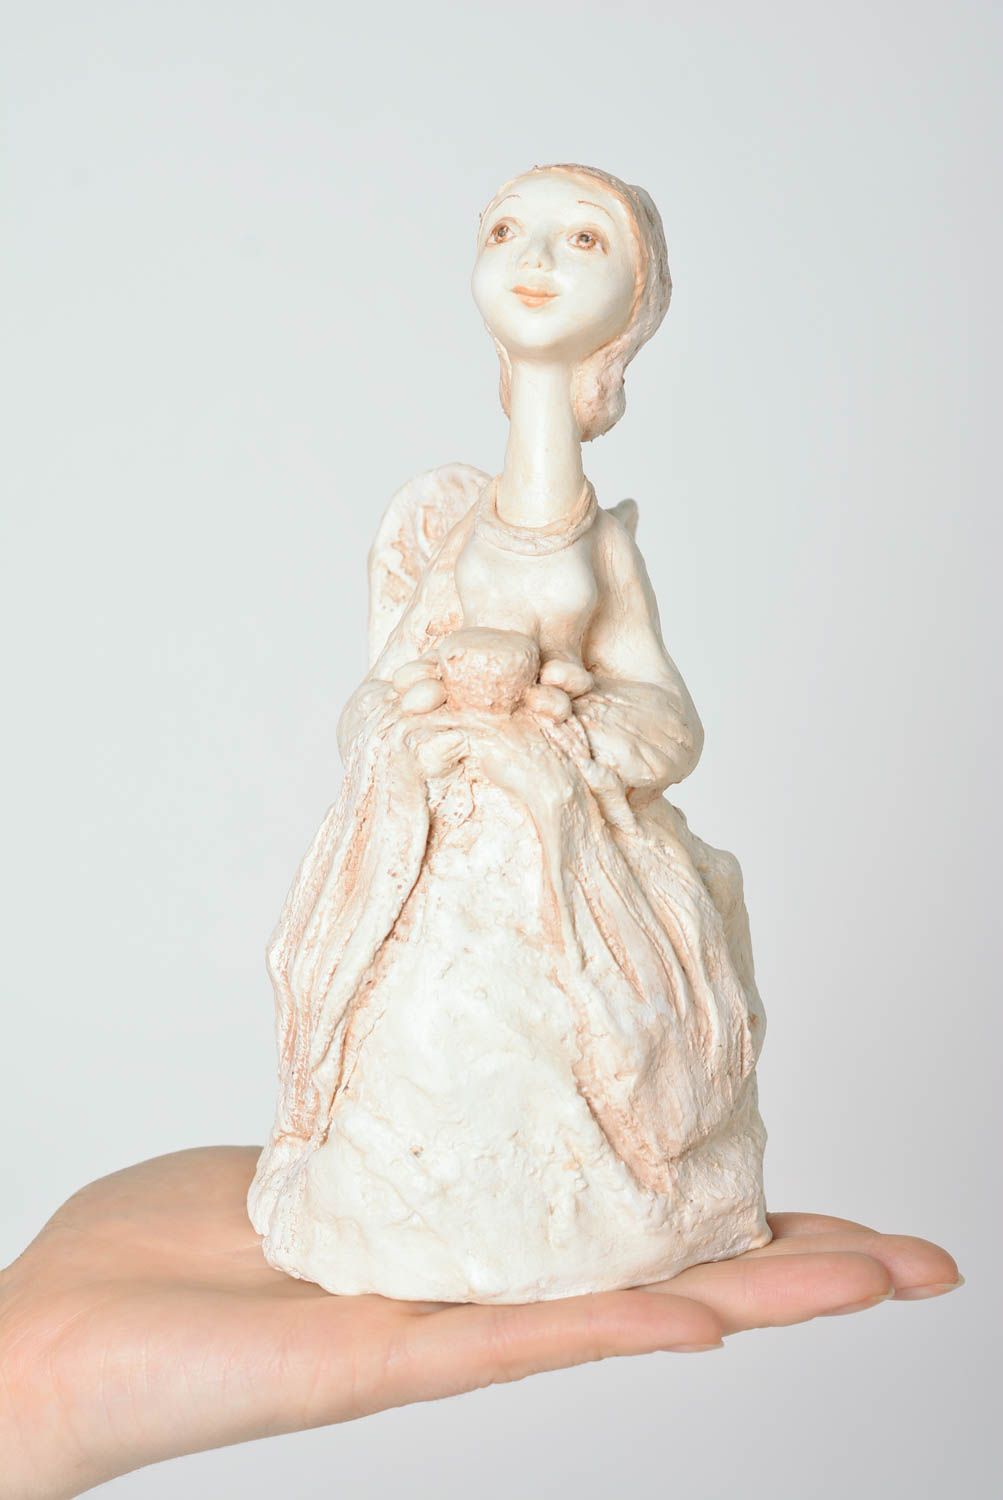 Unusual homemade designer interior figurine molded of air drying clay photo 4